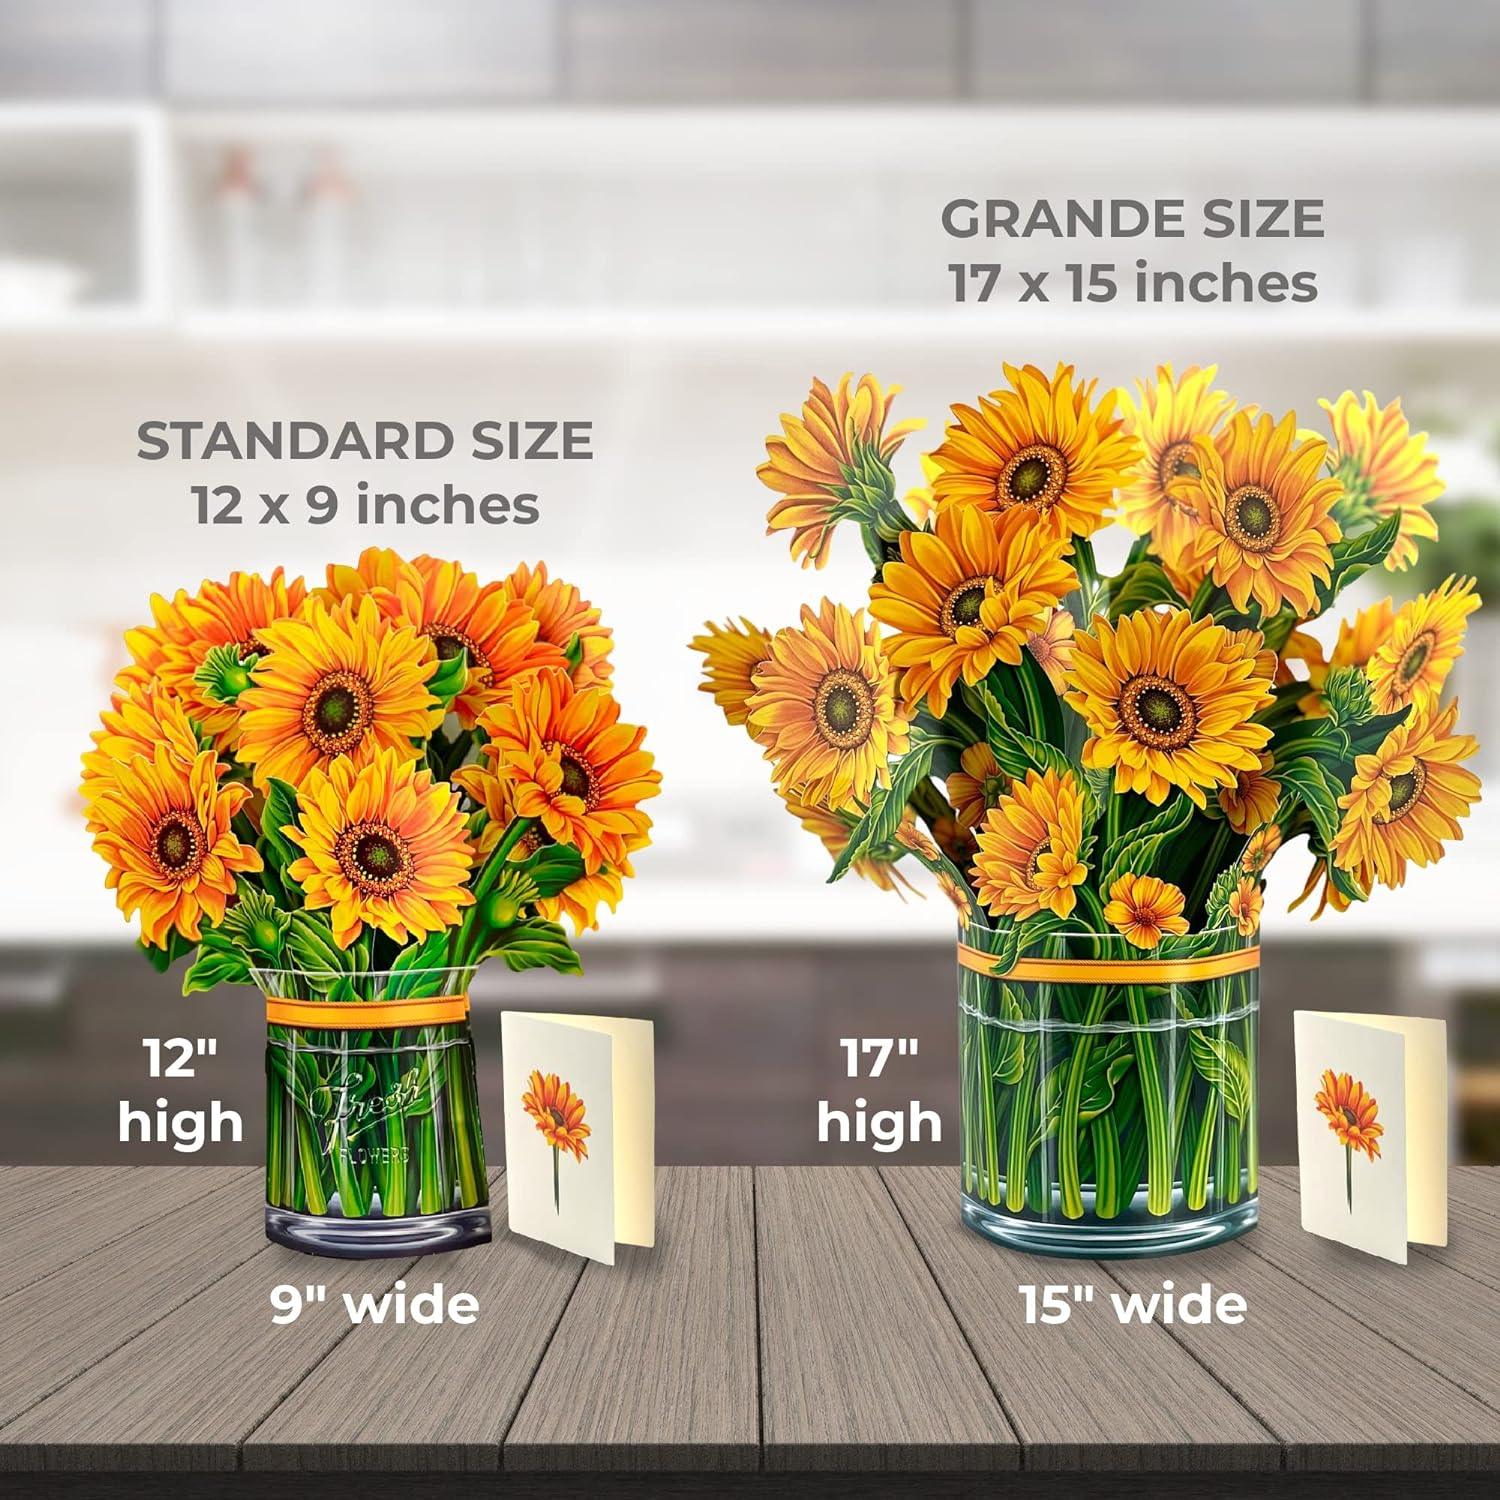 Sunflower Grande, 18 inch Life Sized Forever Flower Bouquet 3D Popup Greeting Cards with Note Card and Envelope